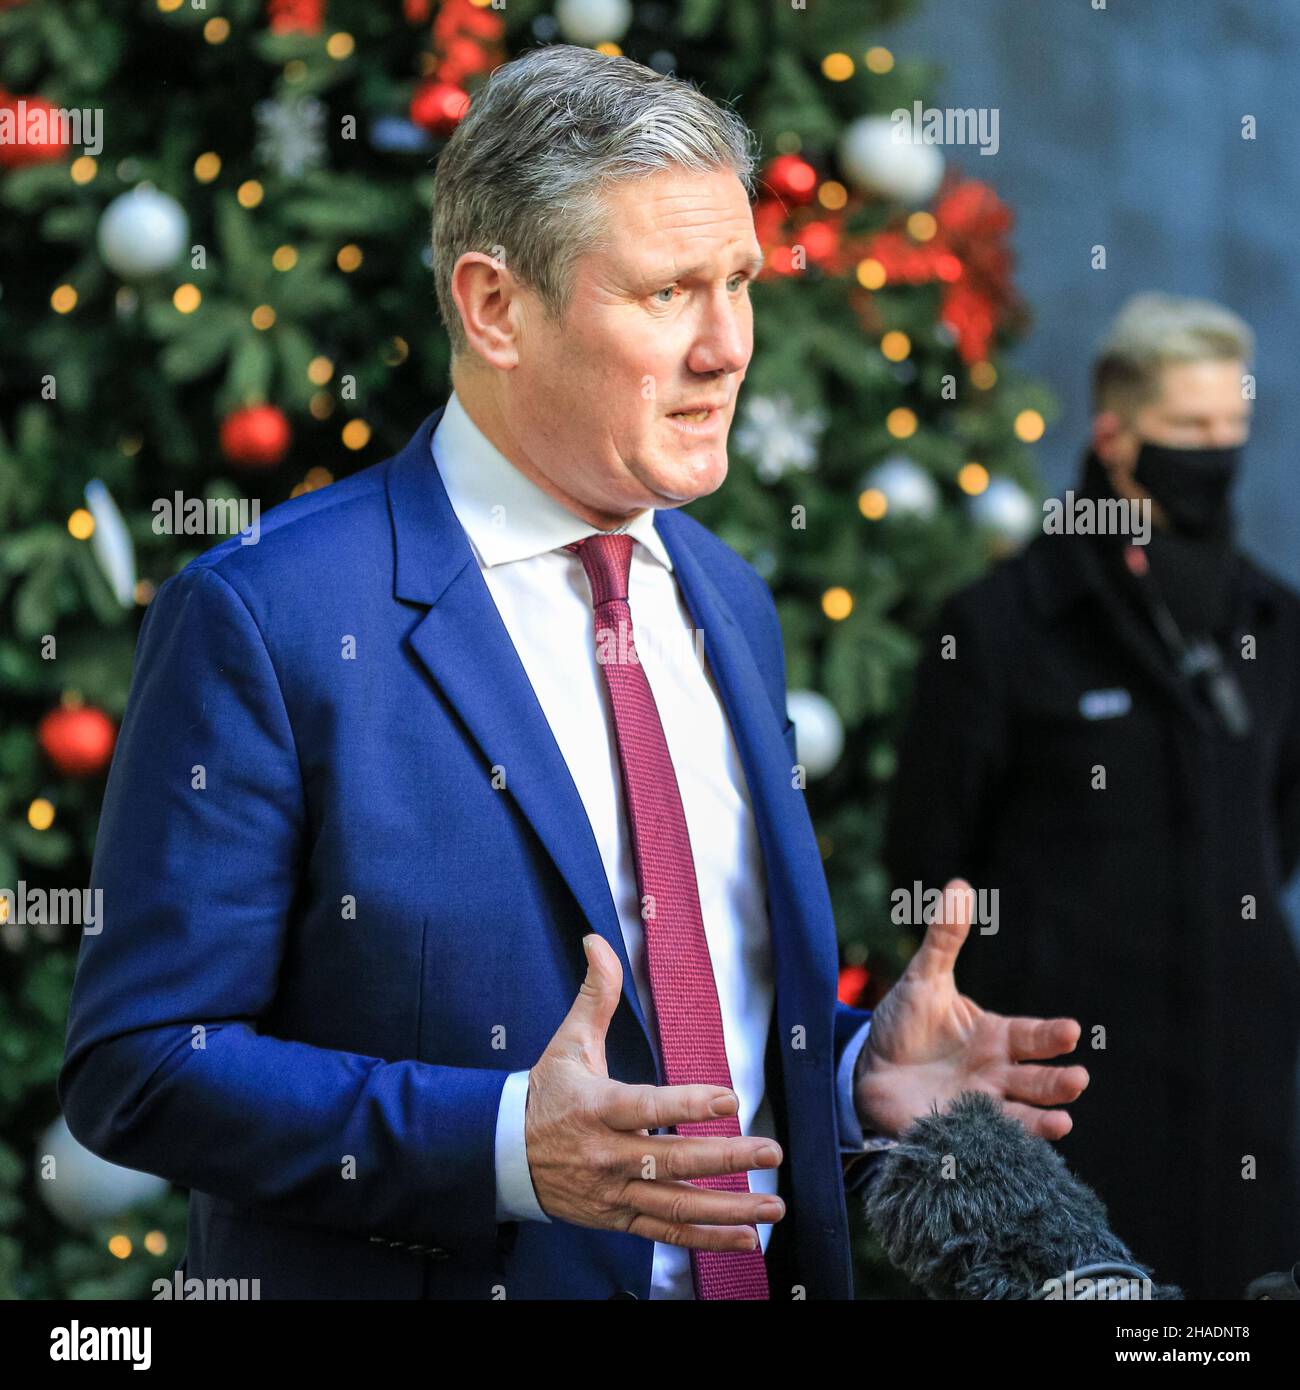 London, UK. 12th Dec, 2021. Sir Keir Starmer KCB QC MP, Leader of the Labour Party, exits the BBC headquarters in London and is interviewed, following an appearance at the Andrew Marr Show. Starmer reacted to the latest set of proposed covid measures, as well as PM Boris Johnson's stance on alleged Christmas parties at Downing Street and in several government departments. Credit: Imageplotter/Alamy Live News Stock Photo